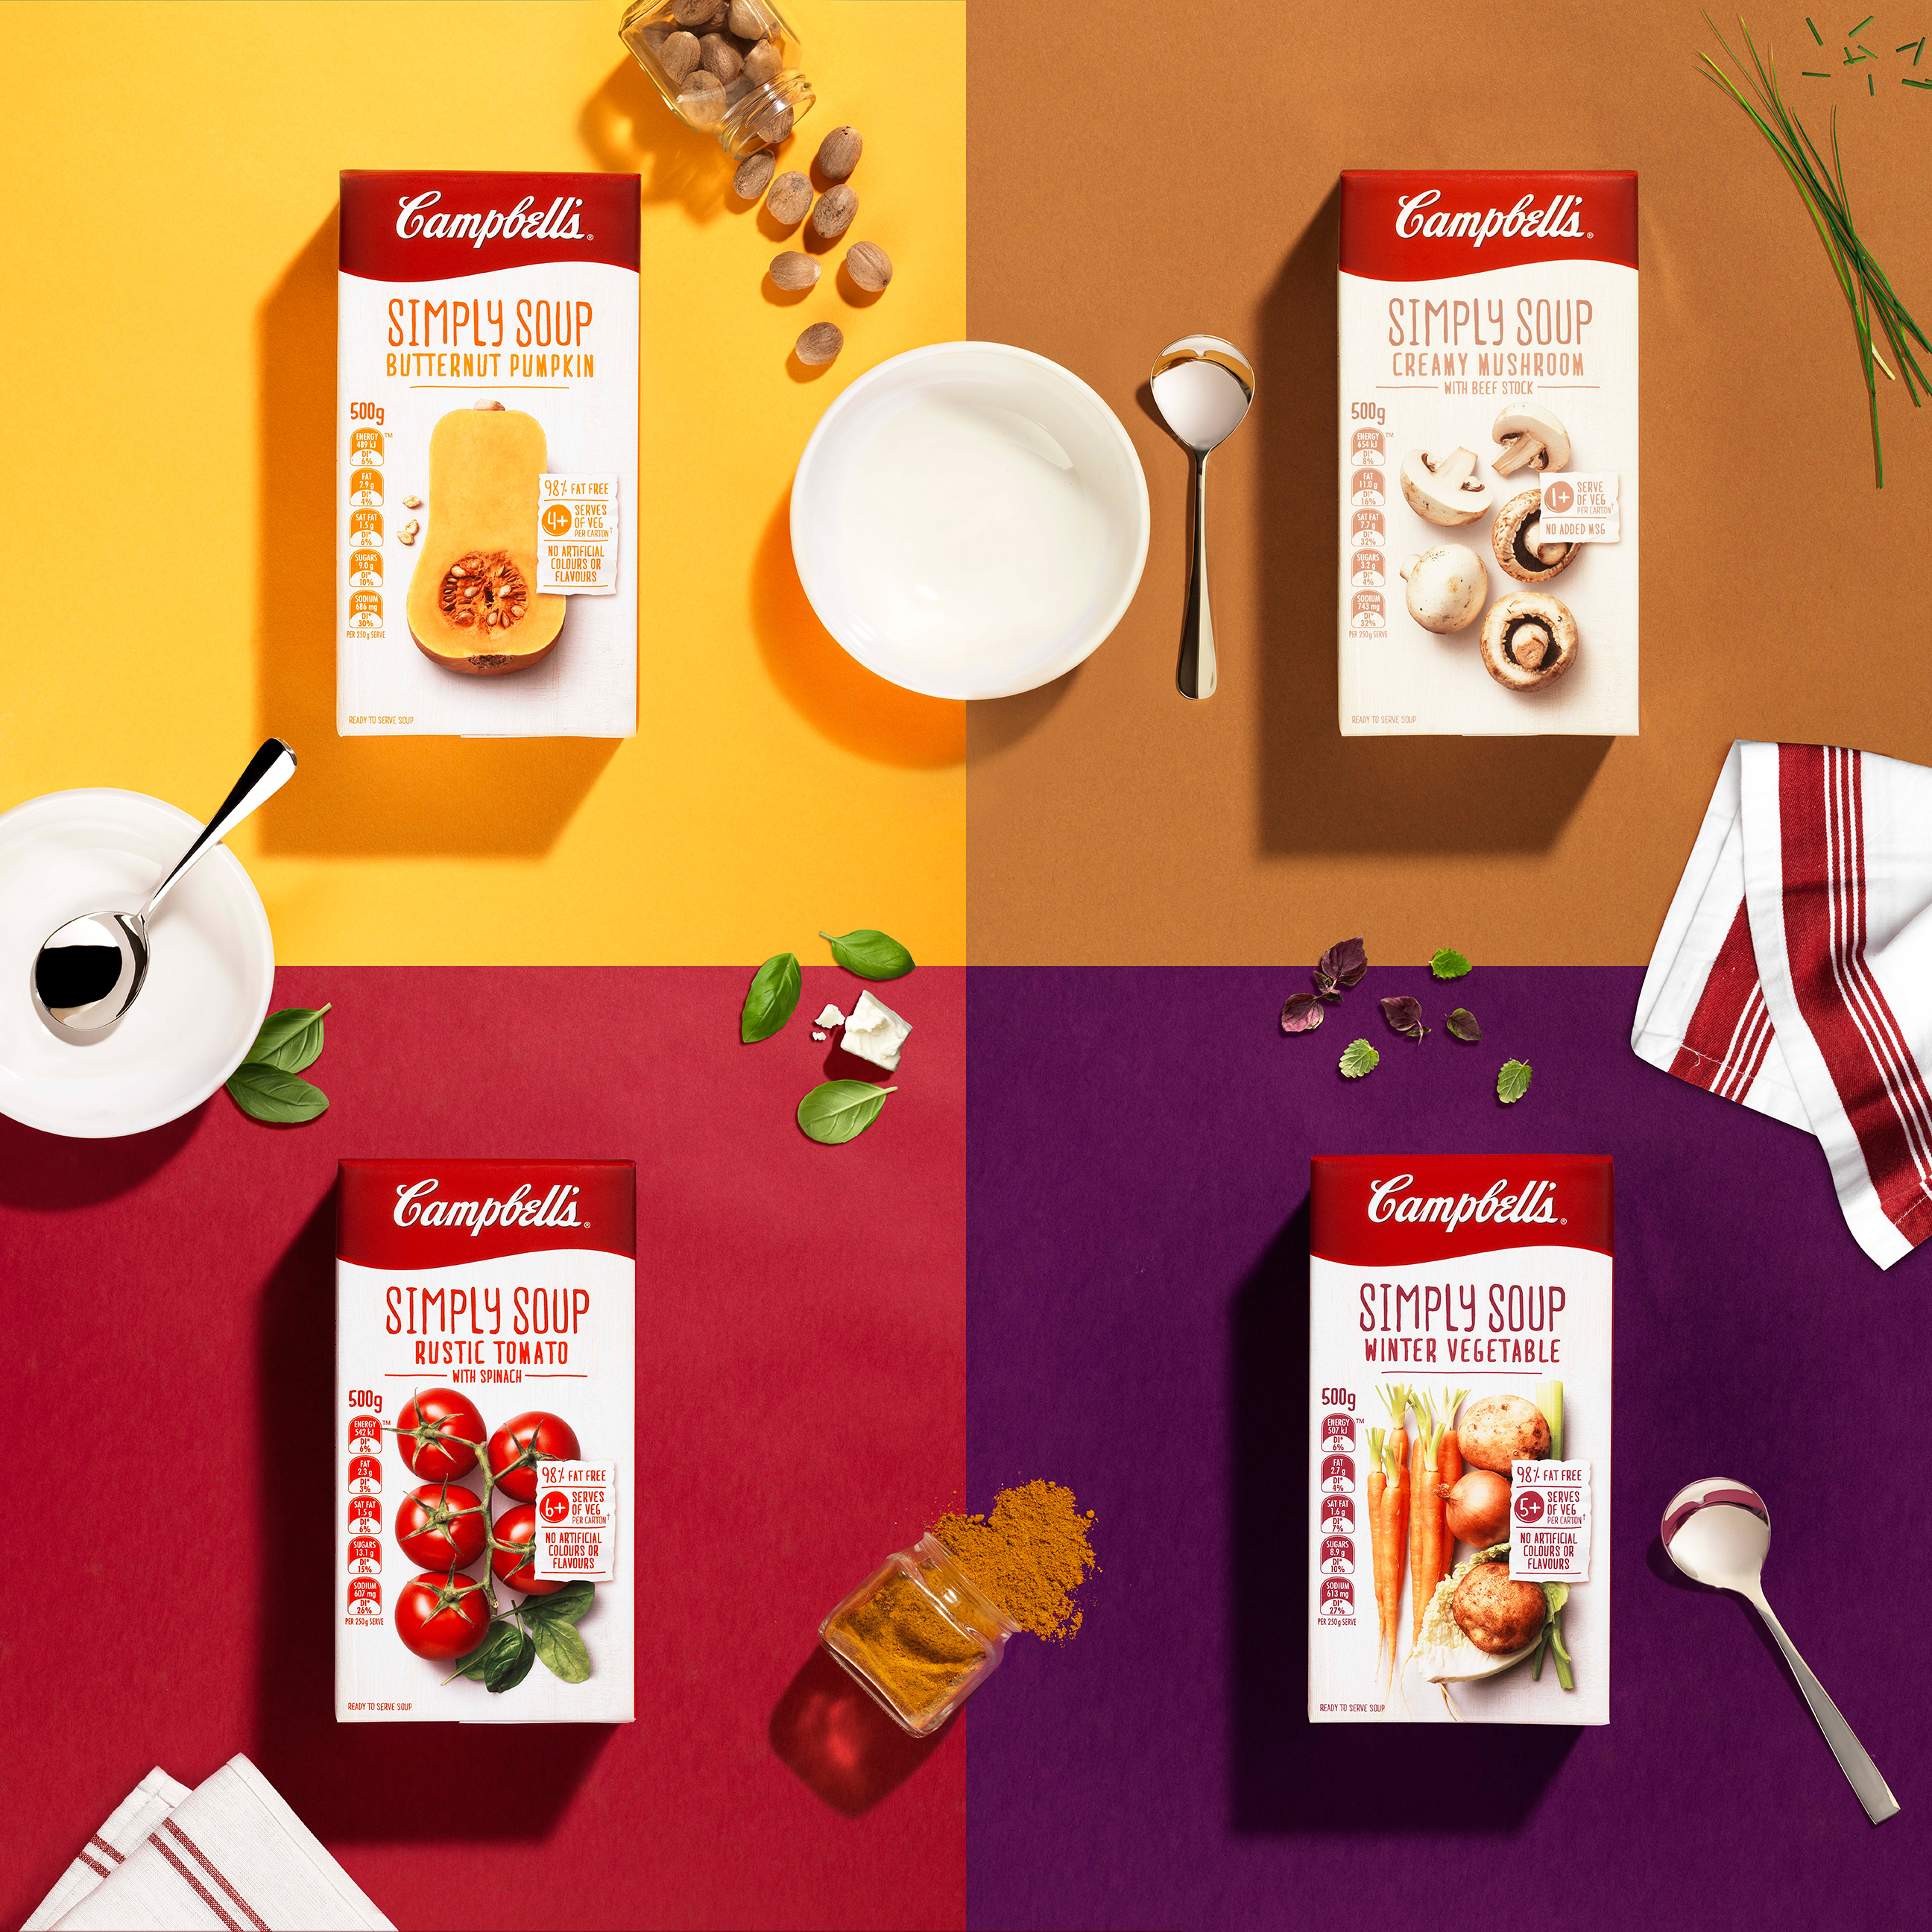 Energi Packaging Design Campbells Simply Soup Butternut Pumpkin Creamy Mushroom Rustic Tomato Winter Vegetable Tetra Pack Product Photography